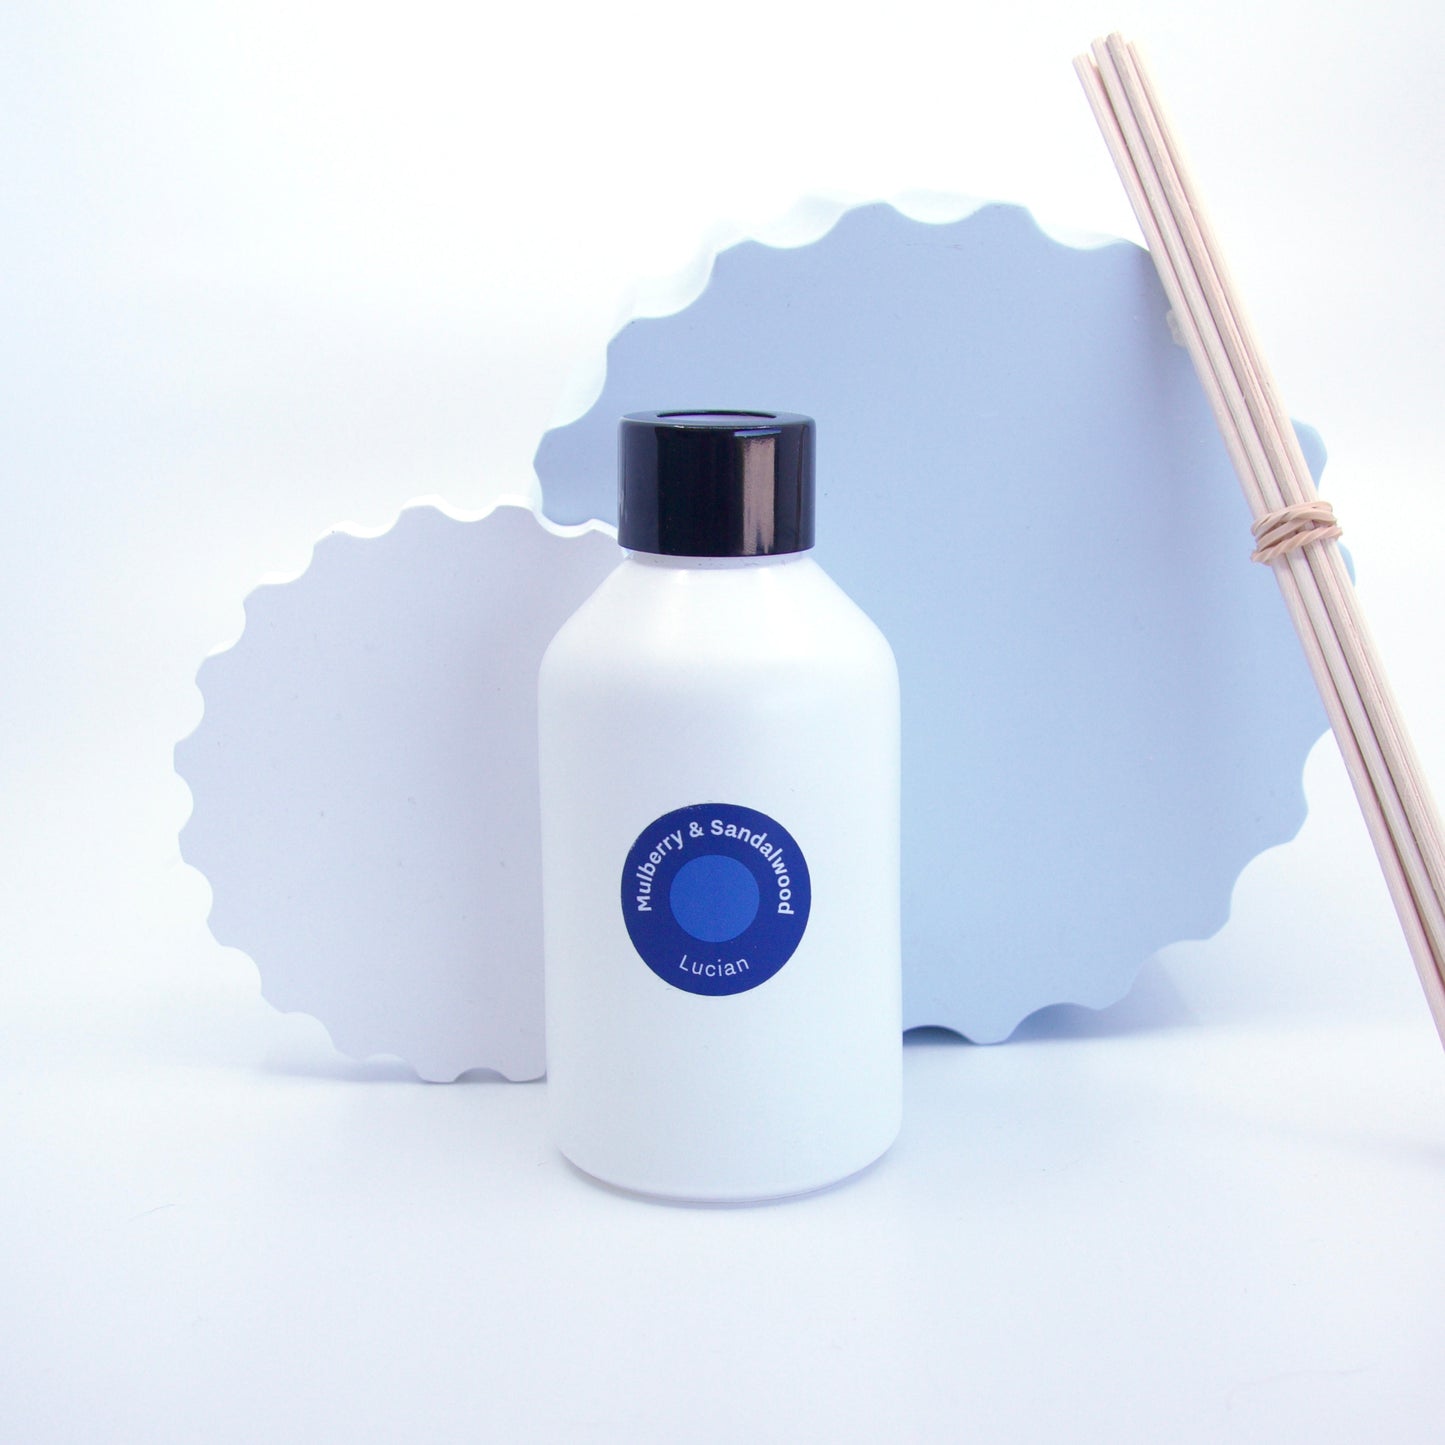 Mulberry & Sandalwood Reed Diffuser